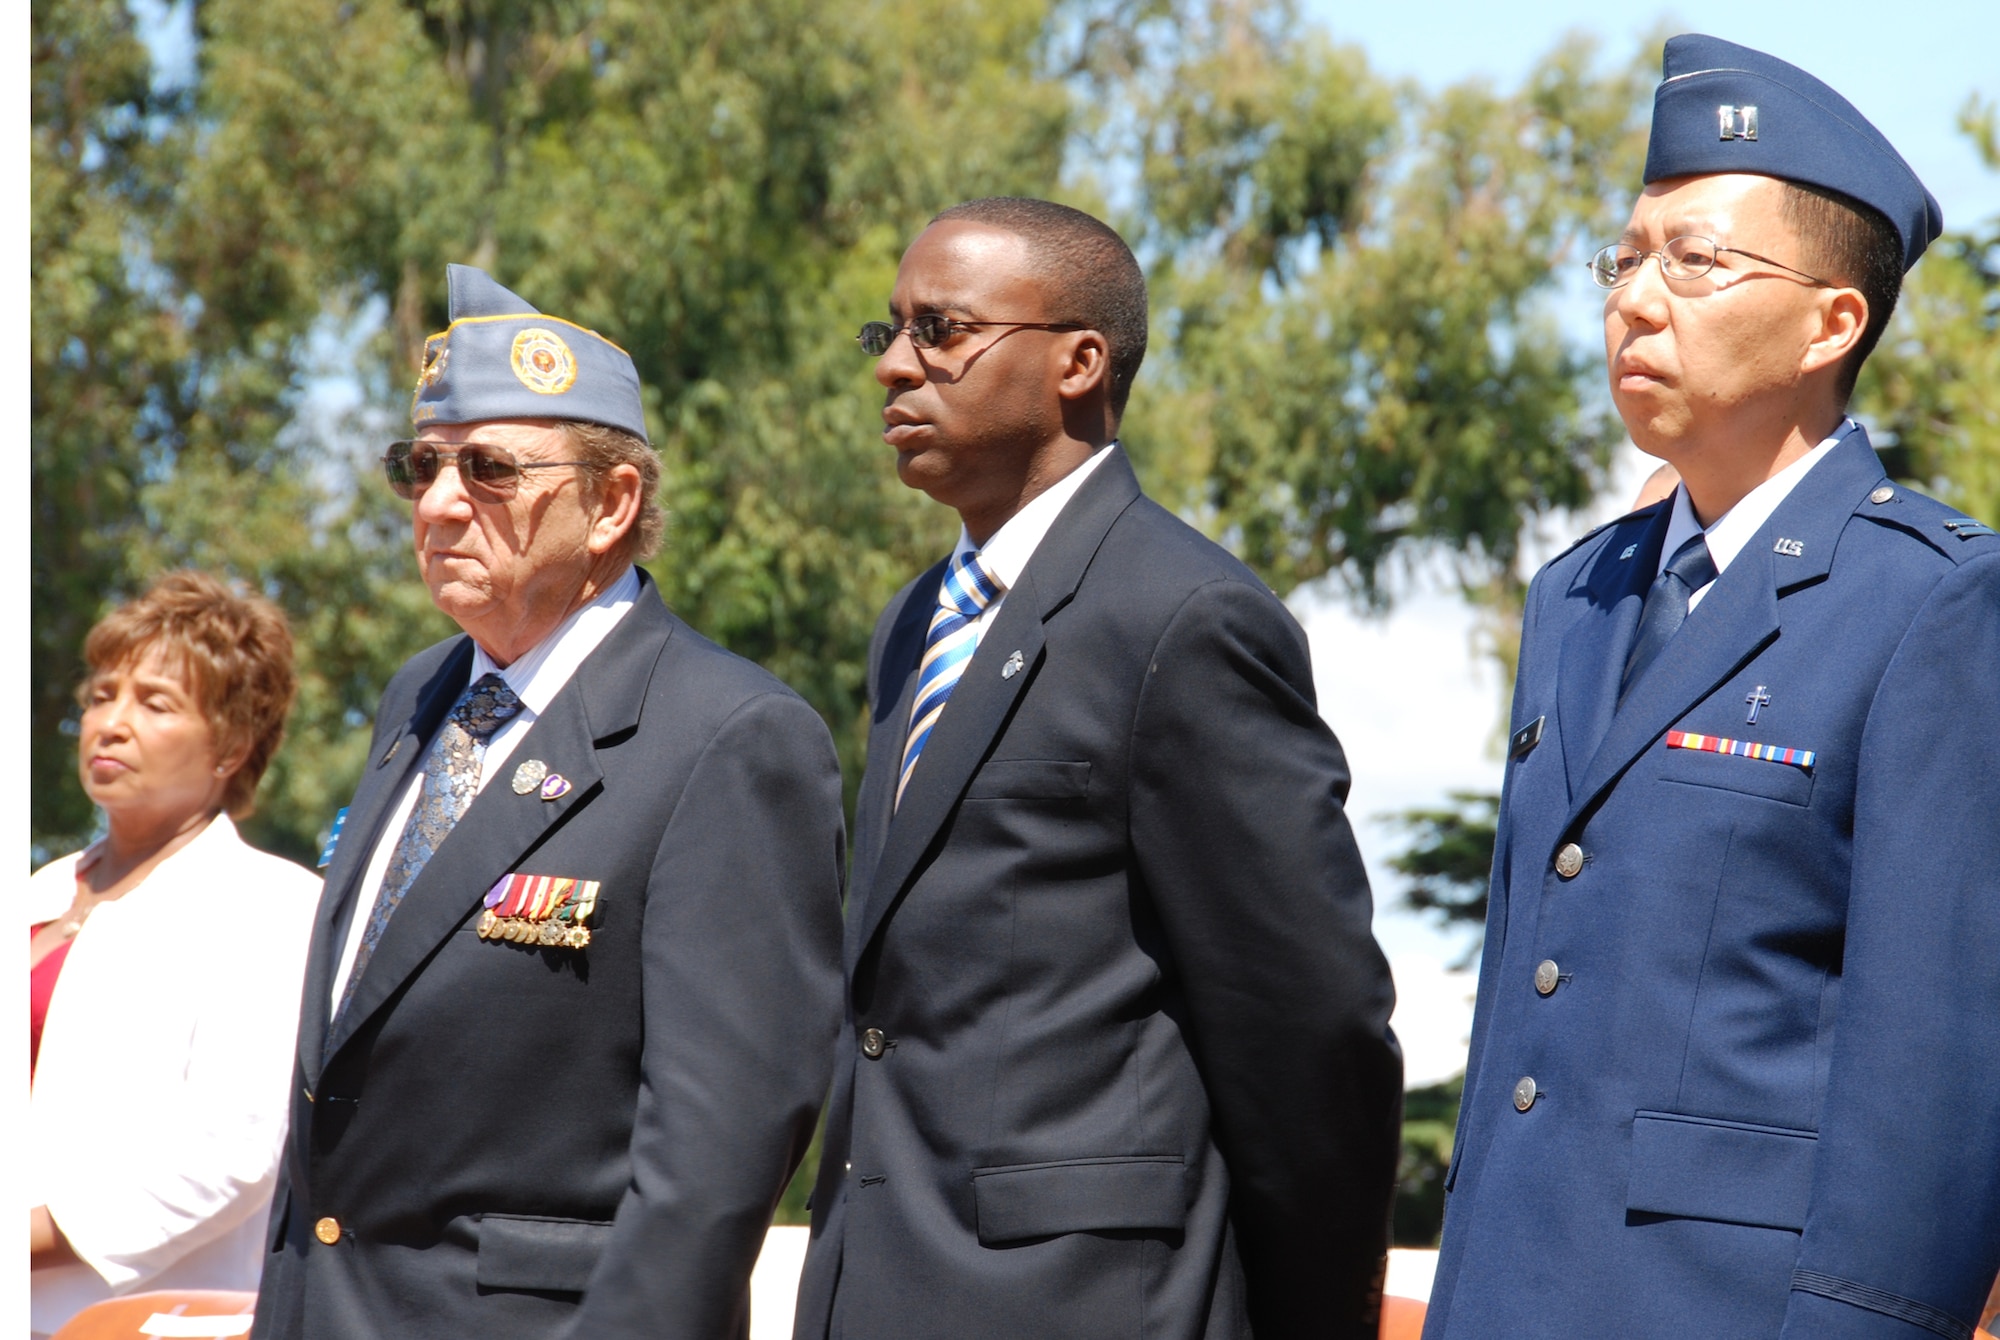 Chaplain (Capt.) Peter Ma represented the Air Force at the Memorial Day observance at the Los Angeles National Cemetery, May 16. (Photo courtesy of the Greater Los Angeles VA)